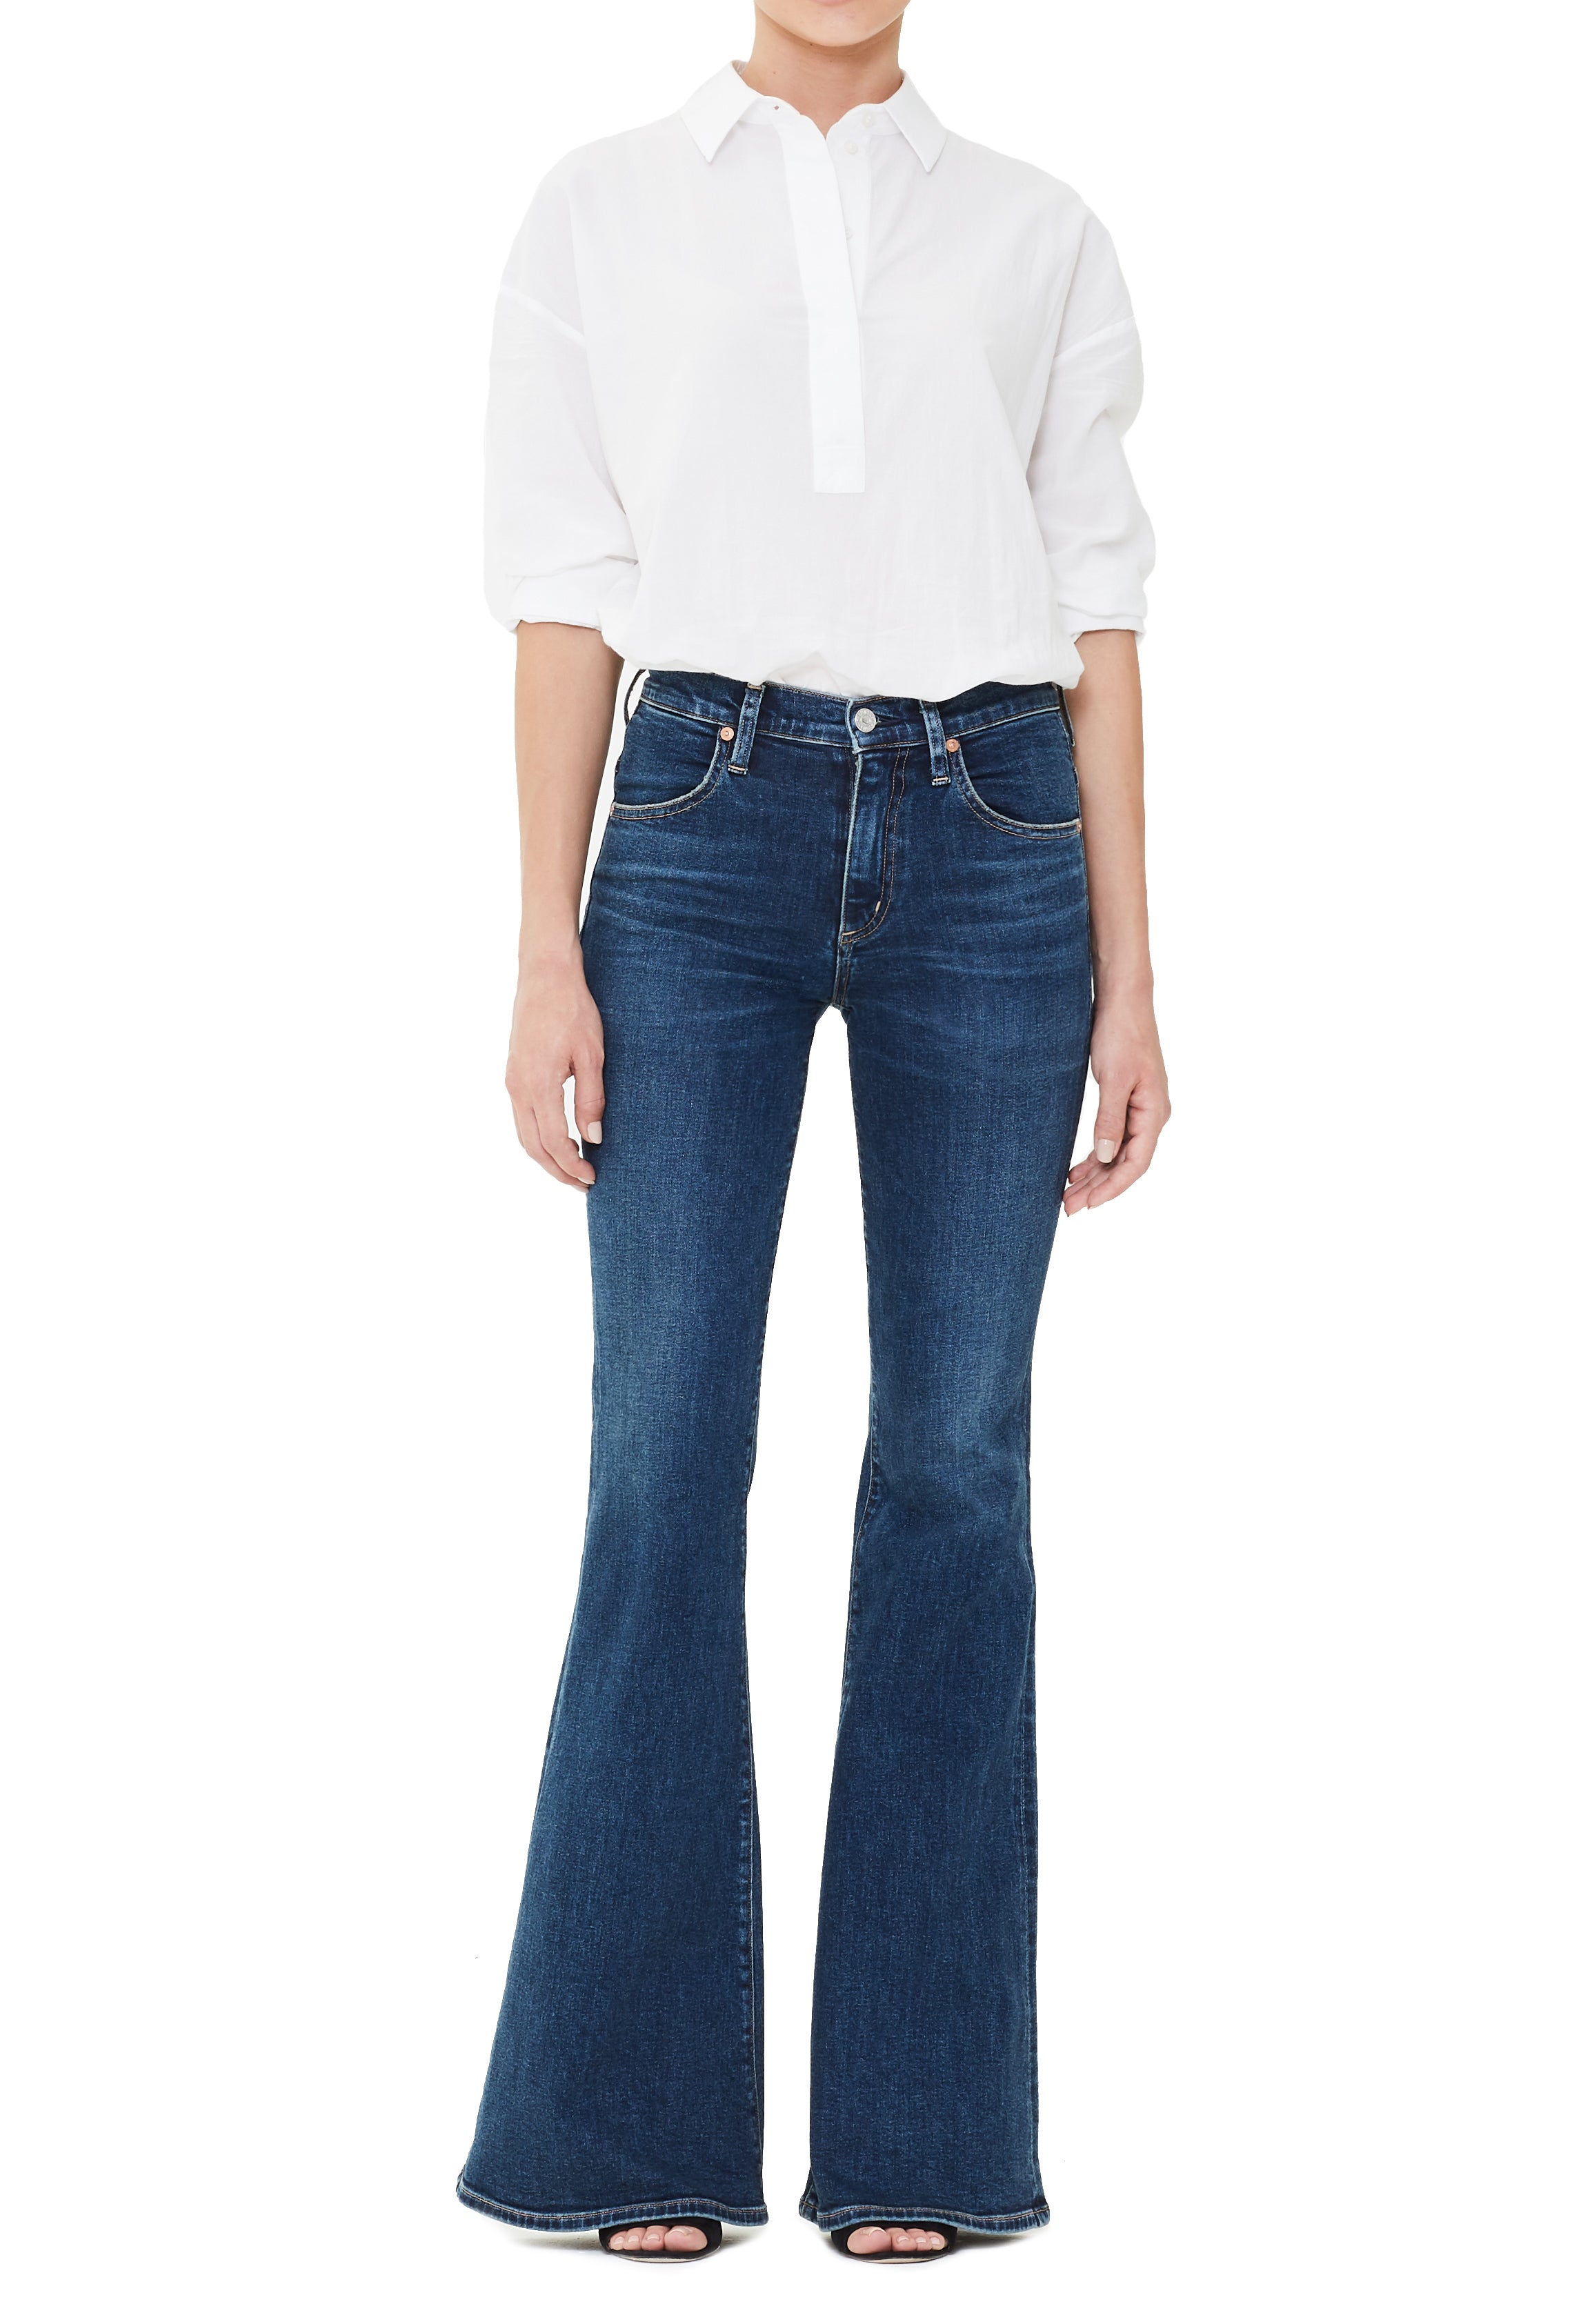 Citizens of Humanity- Chloe Mid Rise Flare Jeans in Dedication ...